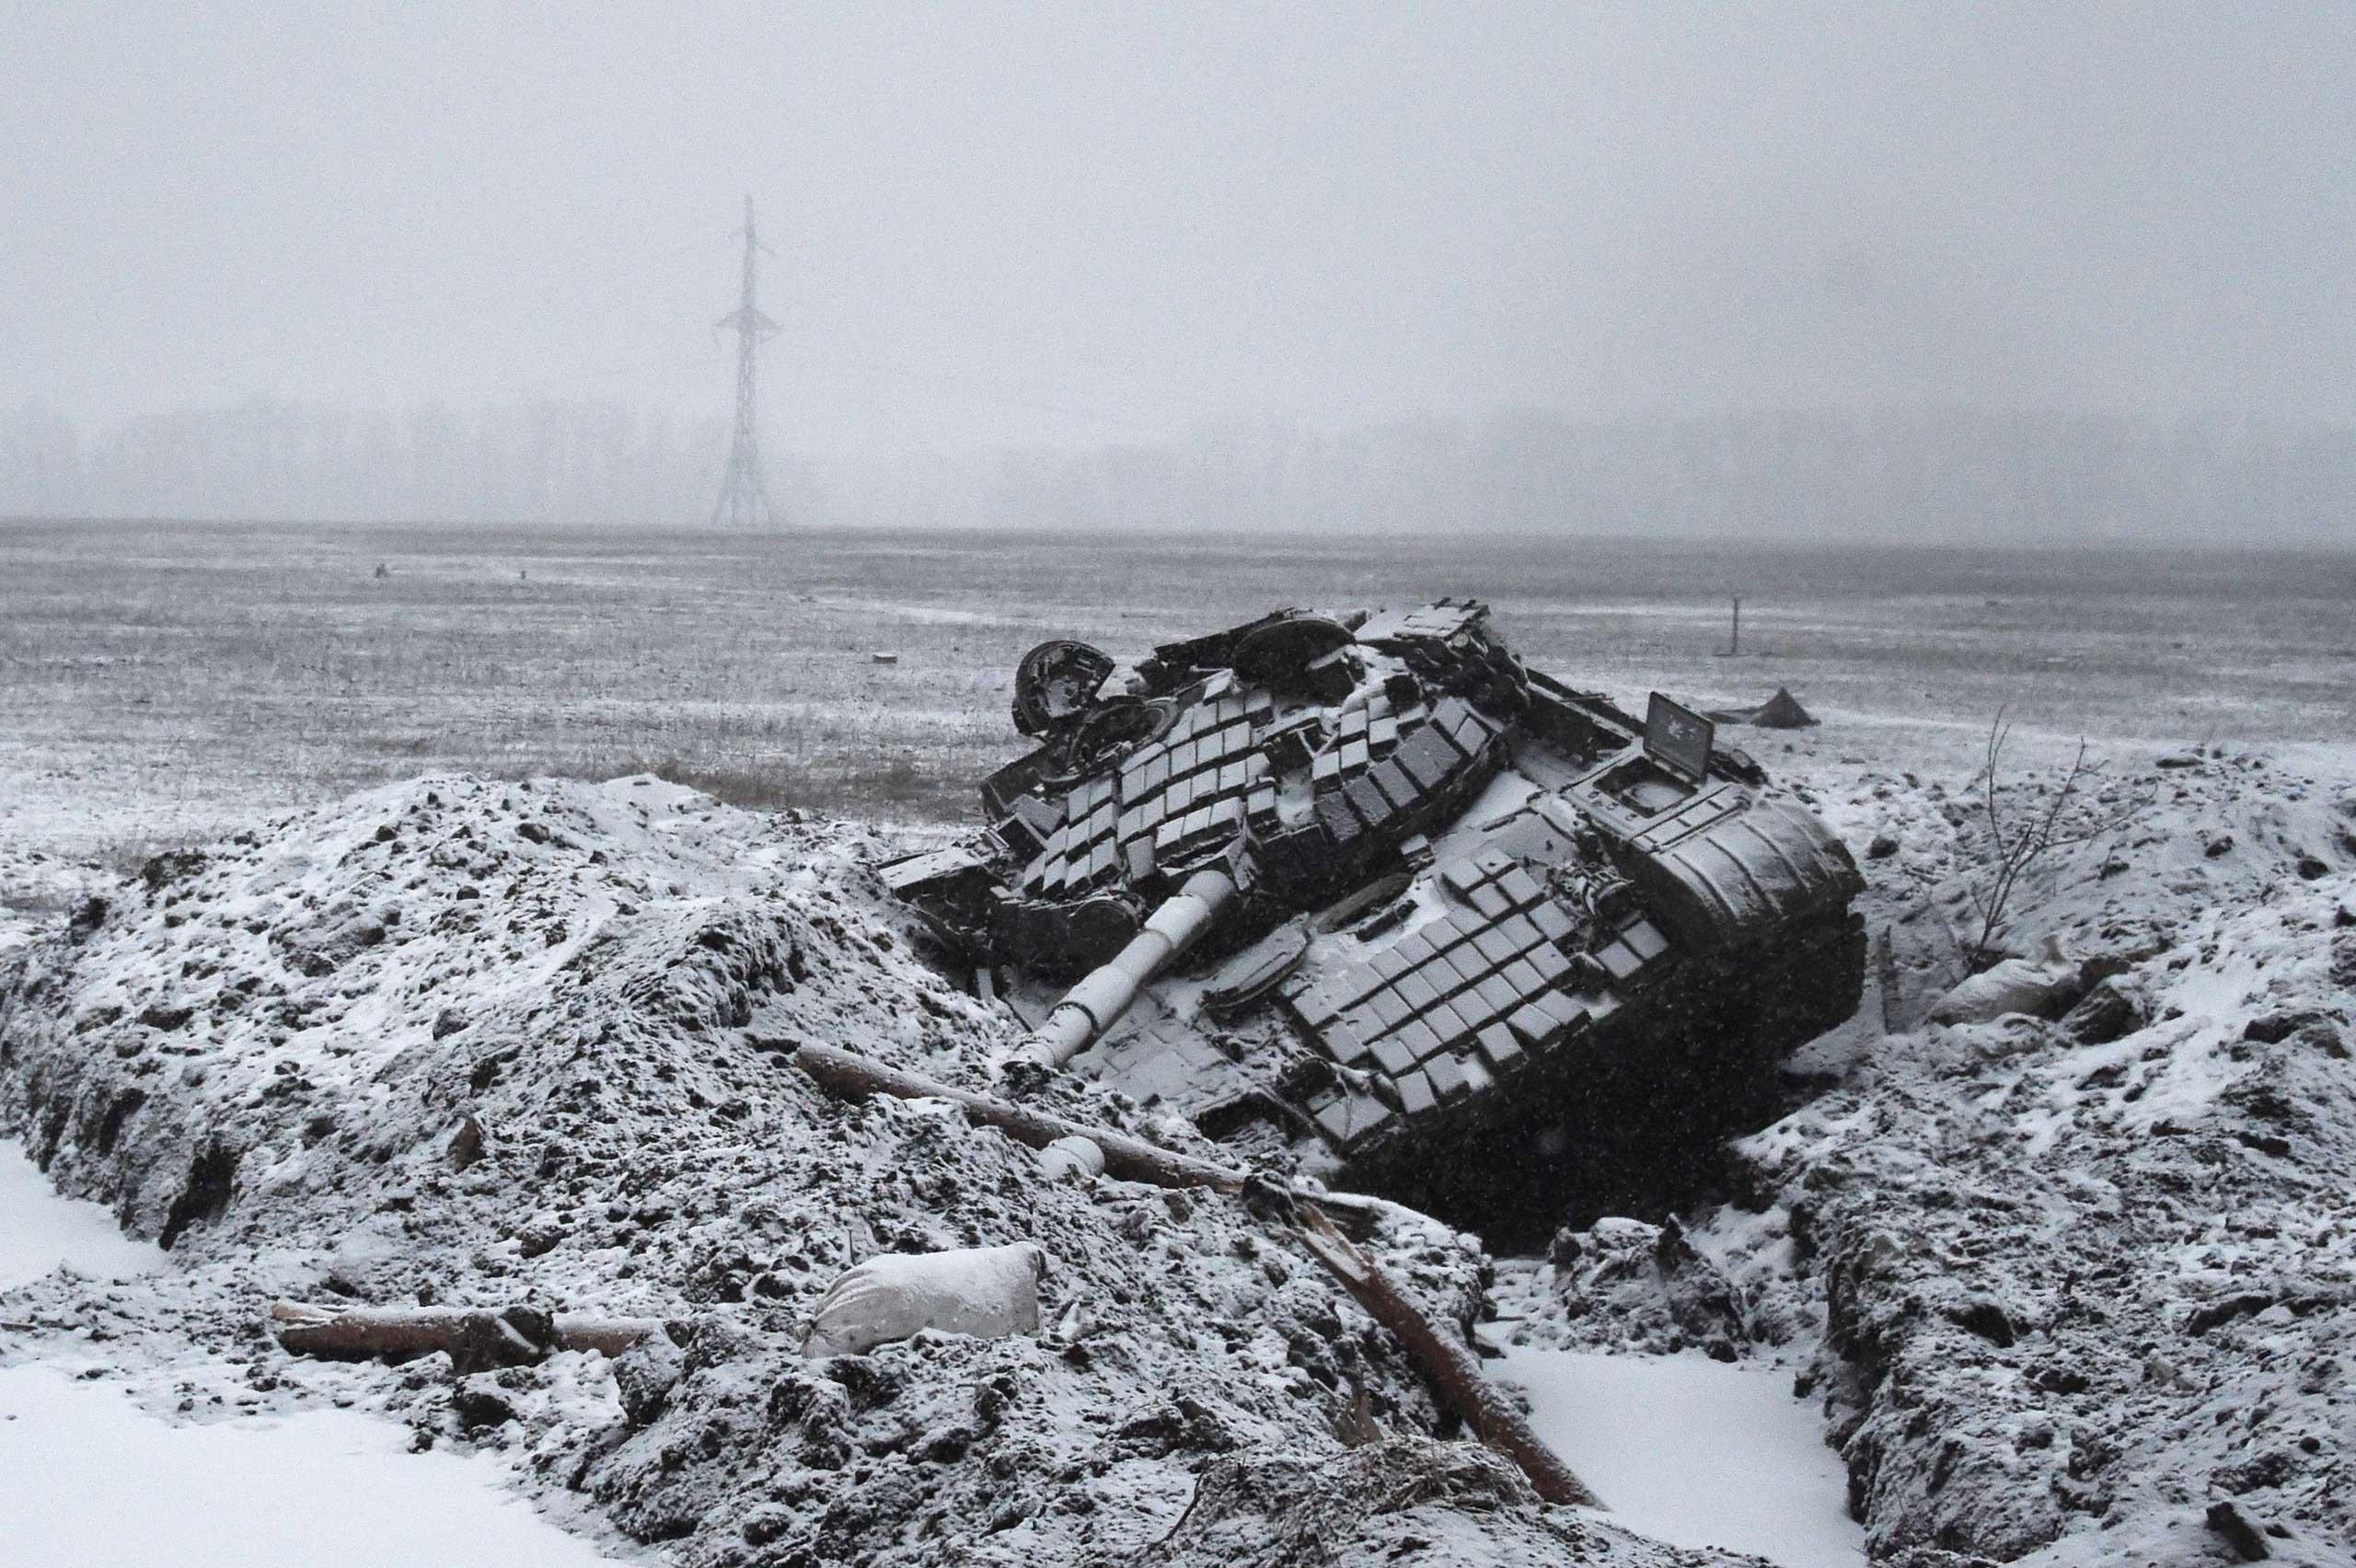 Feb. 9, 2015. A destroyed Ukrainian Army tank sits outside Uglegorsk, 3 miles southwest of Debaltseve, Ukraine. The European Union put fresh sanctions against Moscow on hold ahead of a summit to thrash out a Ukraine peace plan aimed at ending 10 months of bloodshed.